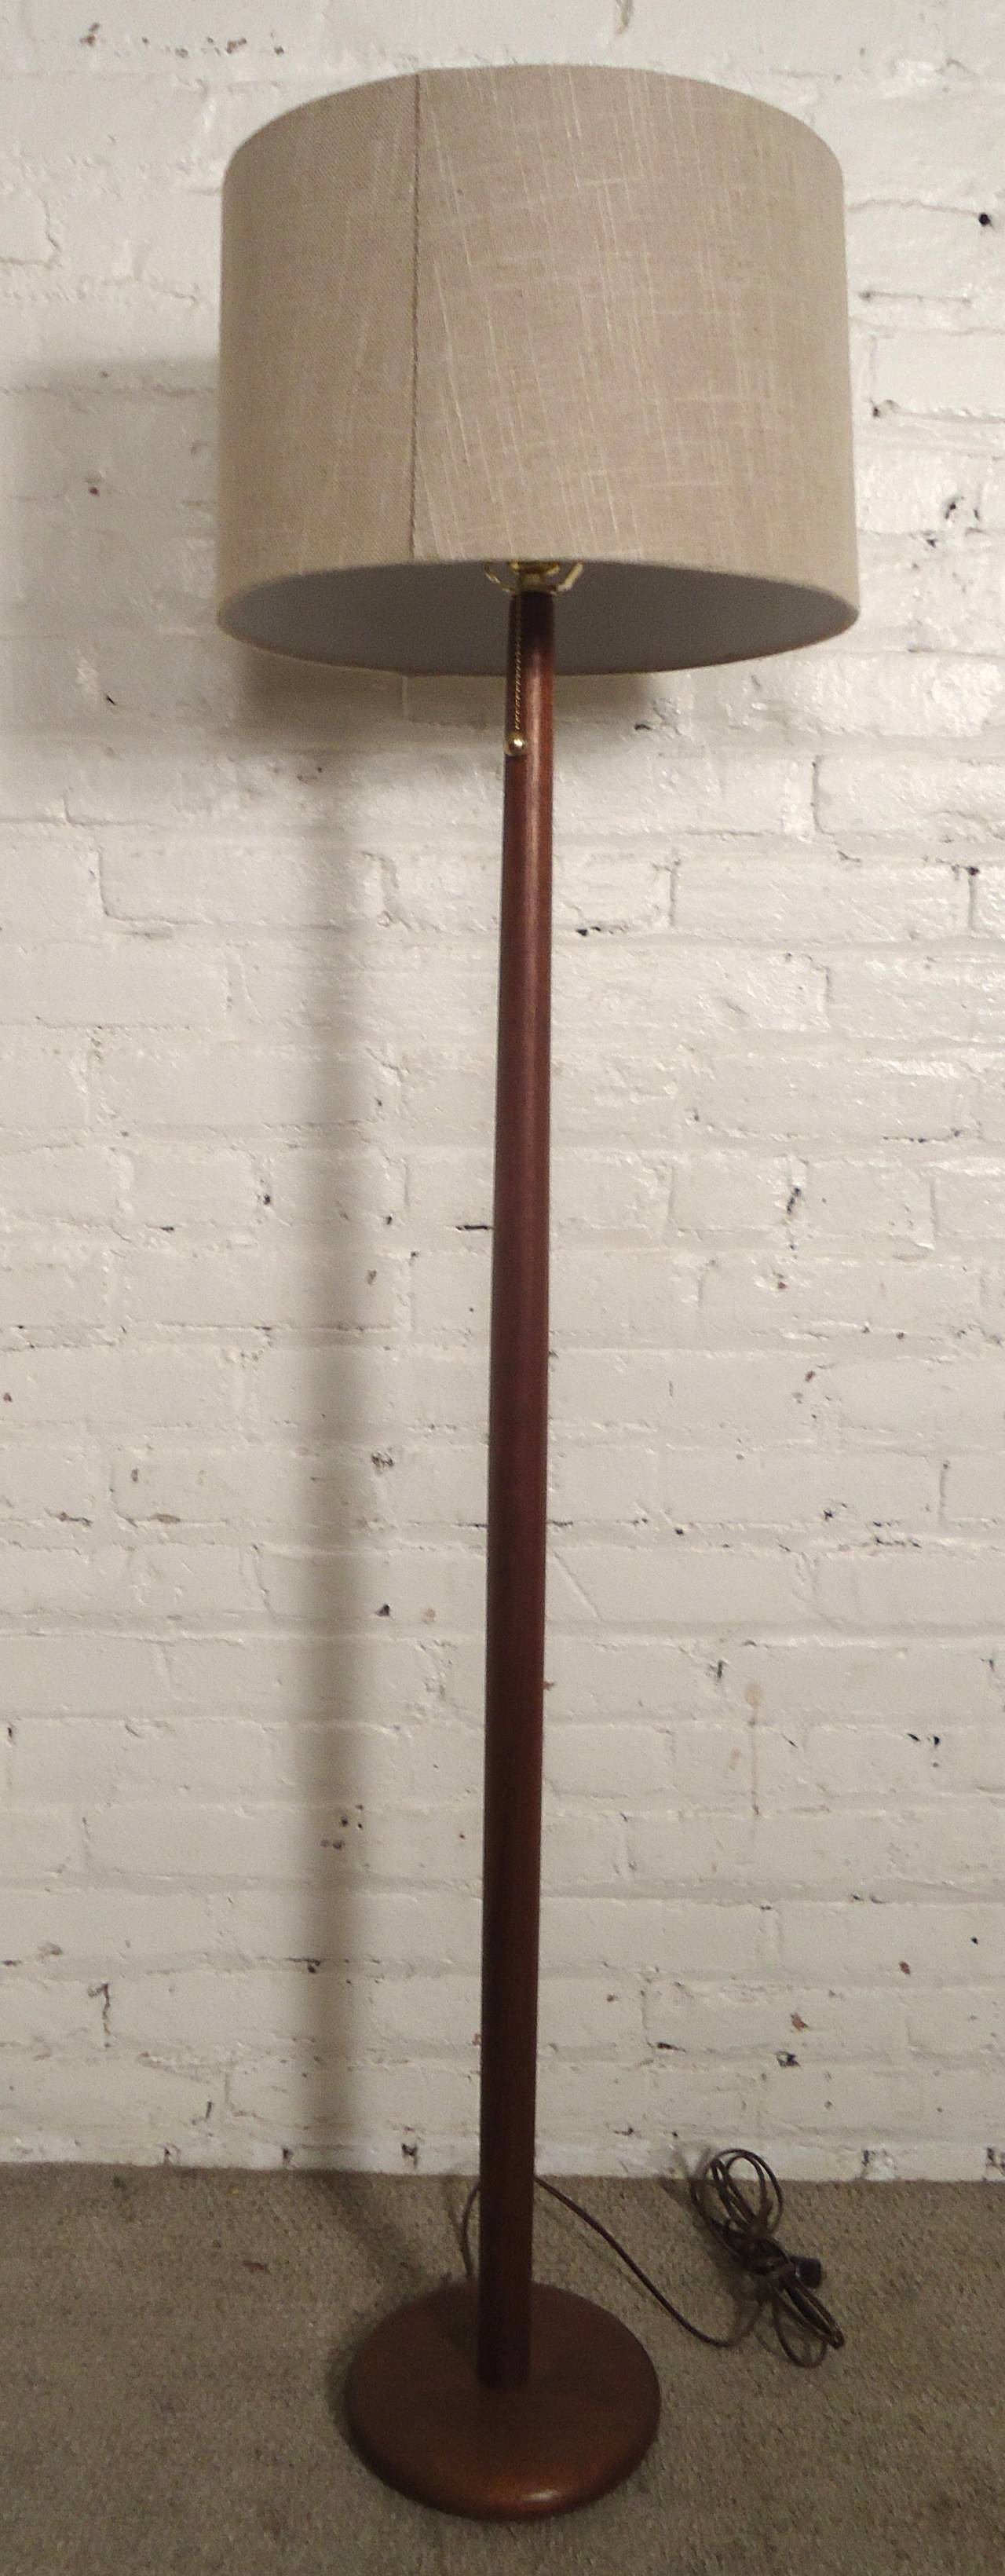 Vintage-Modern Danish standing lamp with sculpted frame that tapers at the top and base. Solid teak with brass harp and shade support, pull string switch.

(Please confirm item location - NY or NJ - with dealer)